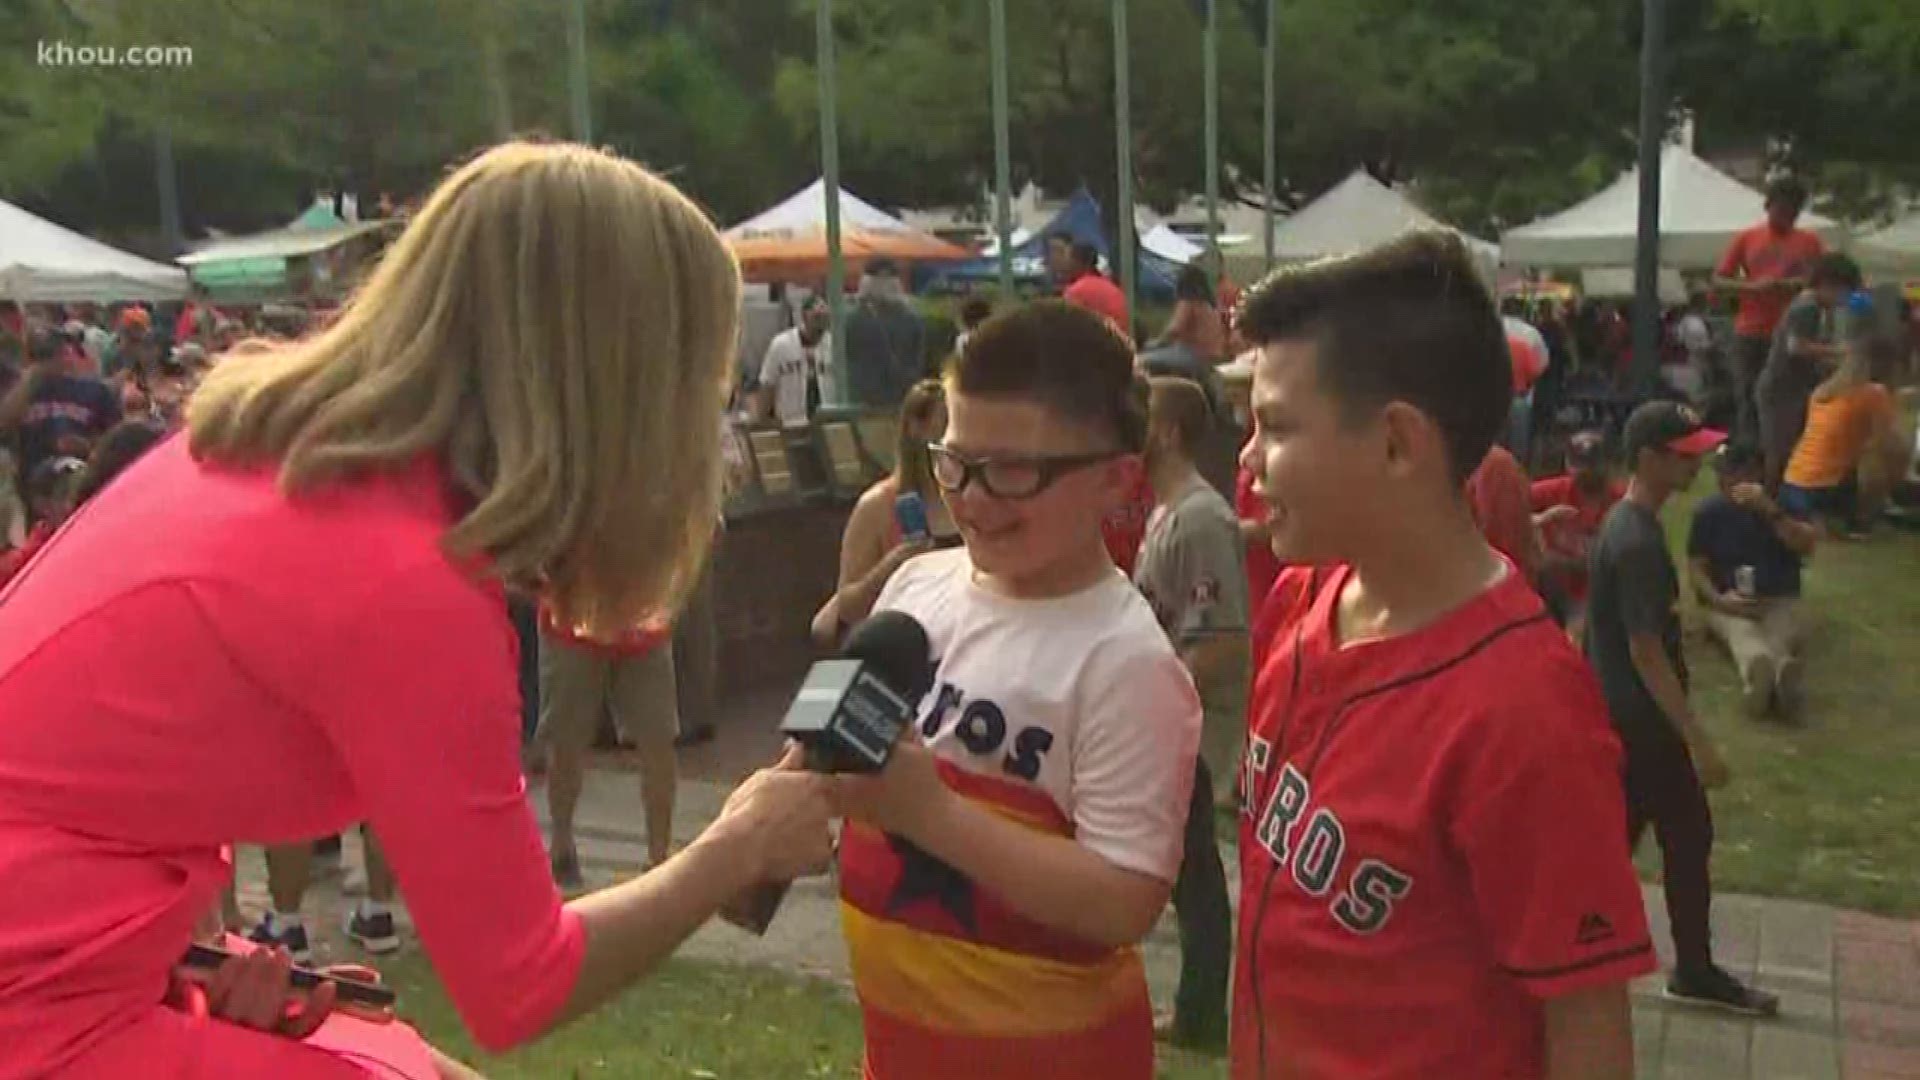 Astros fans showed out for the street festival ahead of the team's home opener at Minute Maid Park.